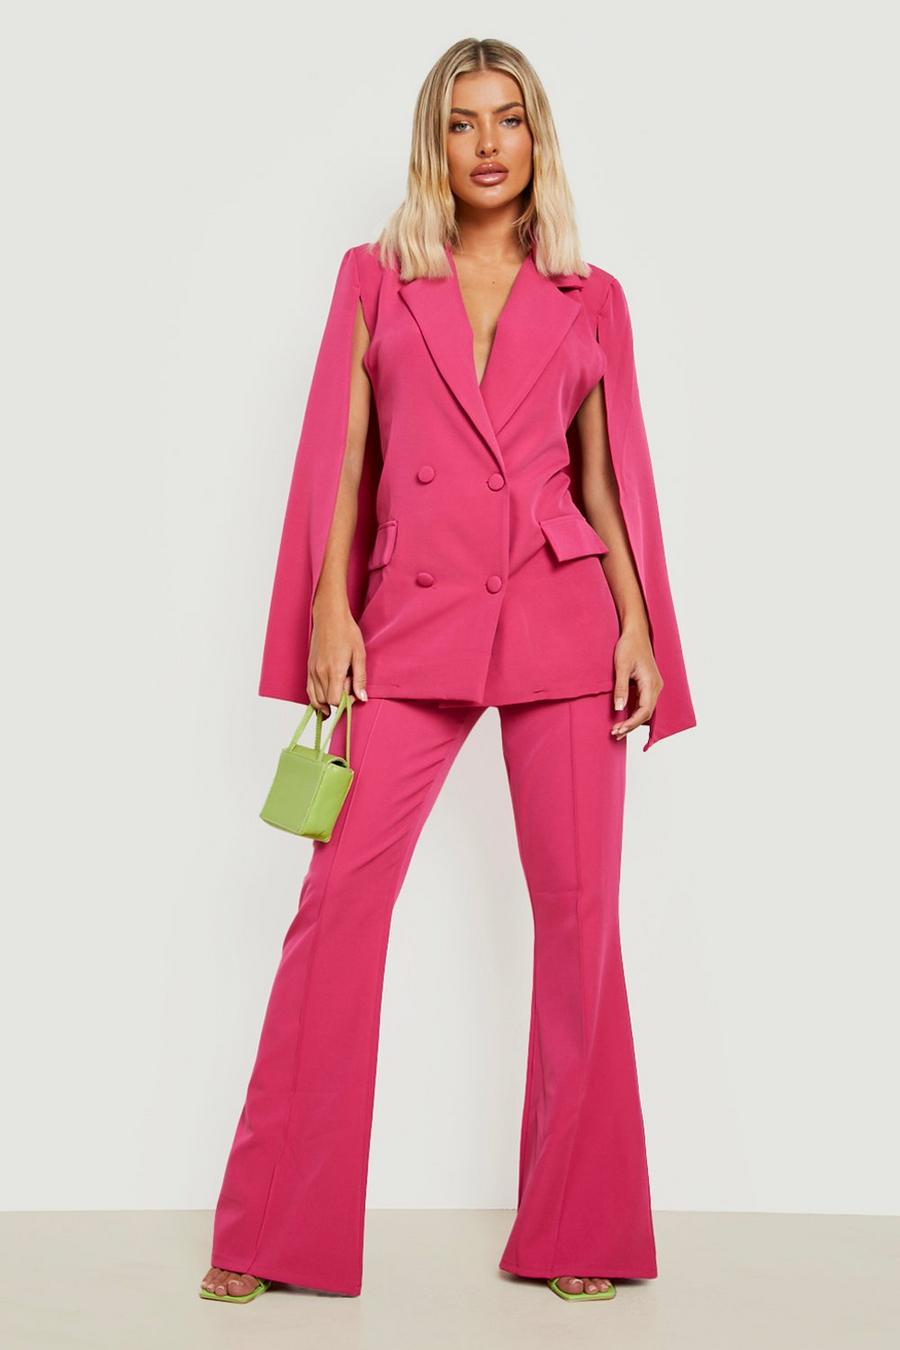 Hot pink rose Double Breasted Cape Sleeve Tailored Blazer